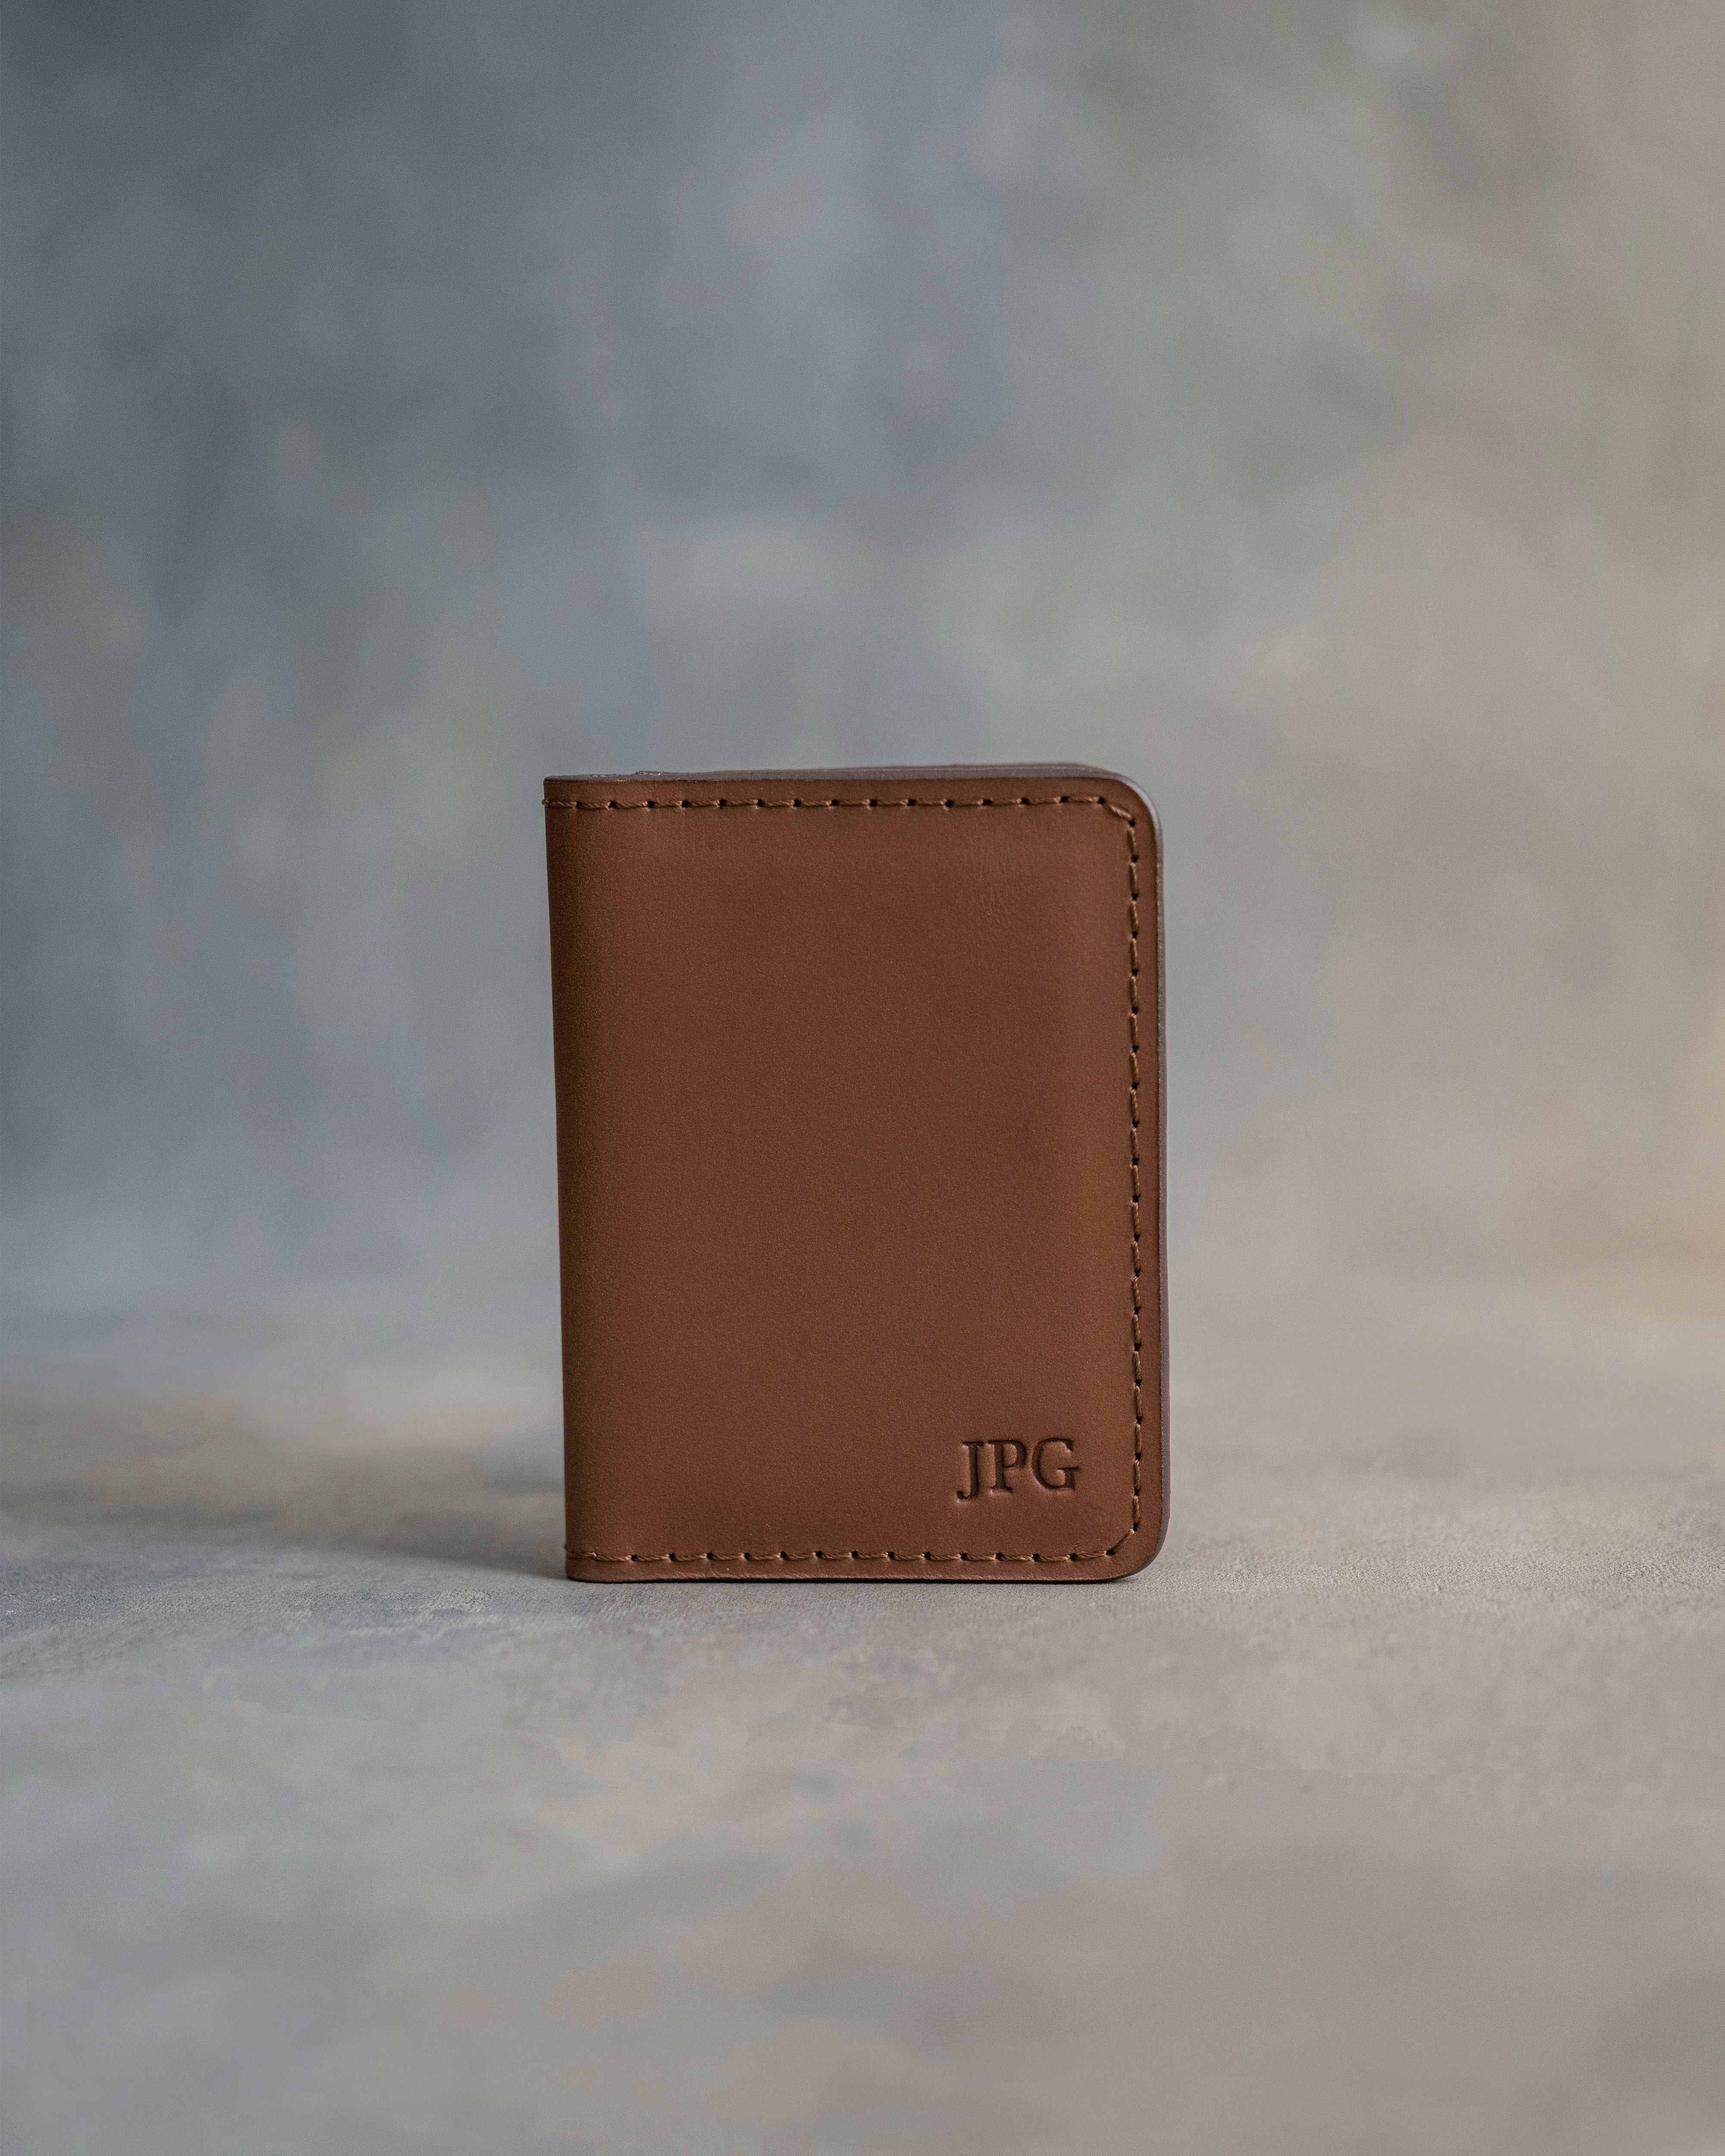 Personalized card wallet